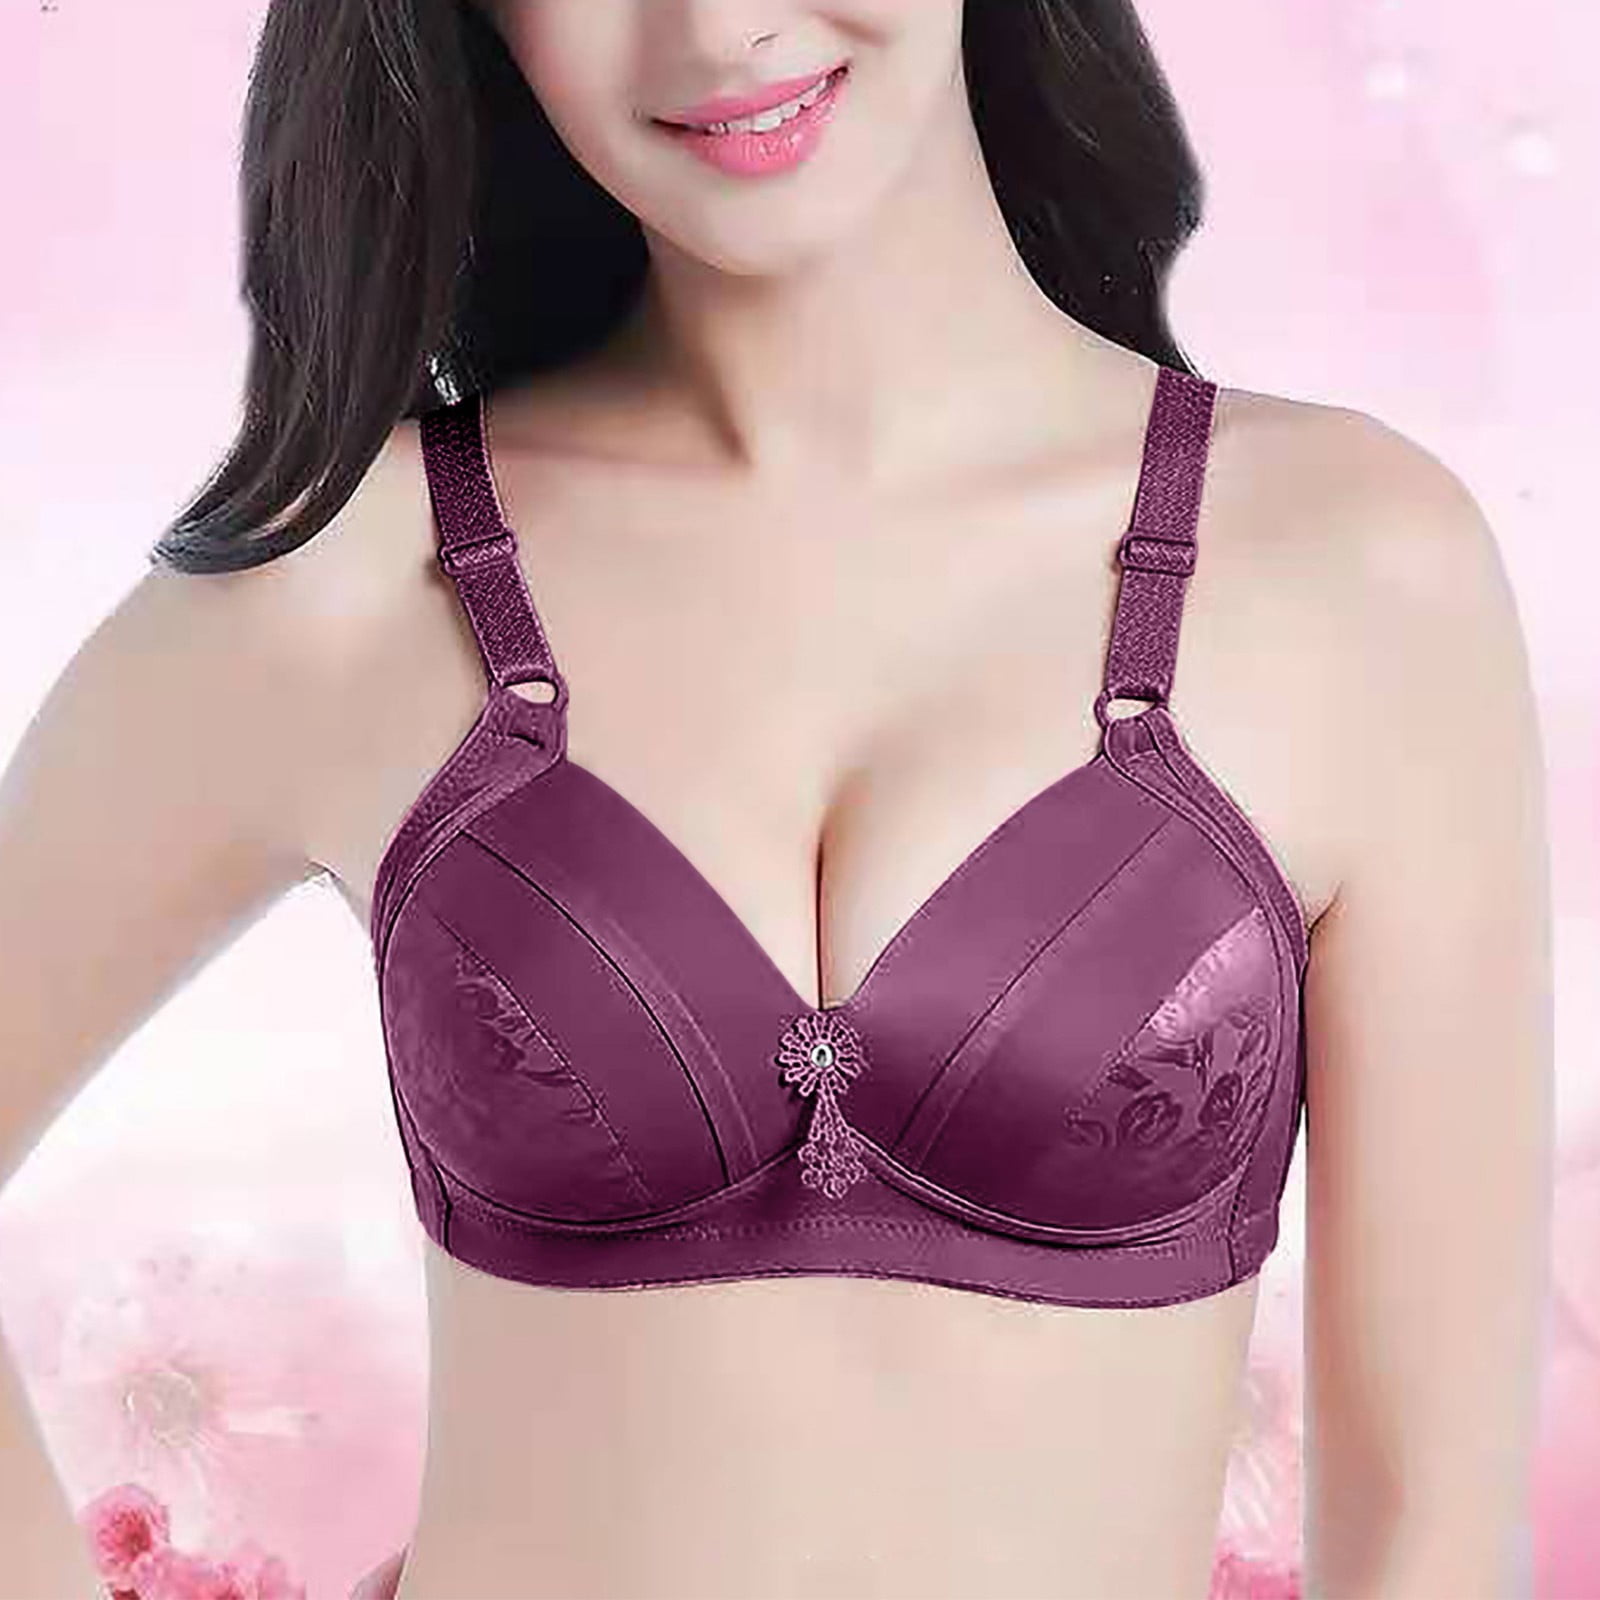 40/90 42/95 44/100 D cup large size push up bra,lace seamless underwear bras  for women,sexy fashion lingerie brassiere - AliExpress